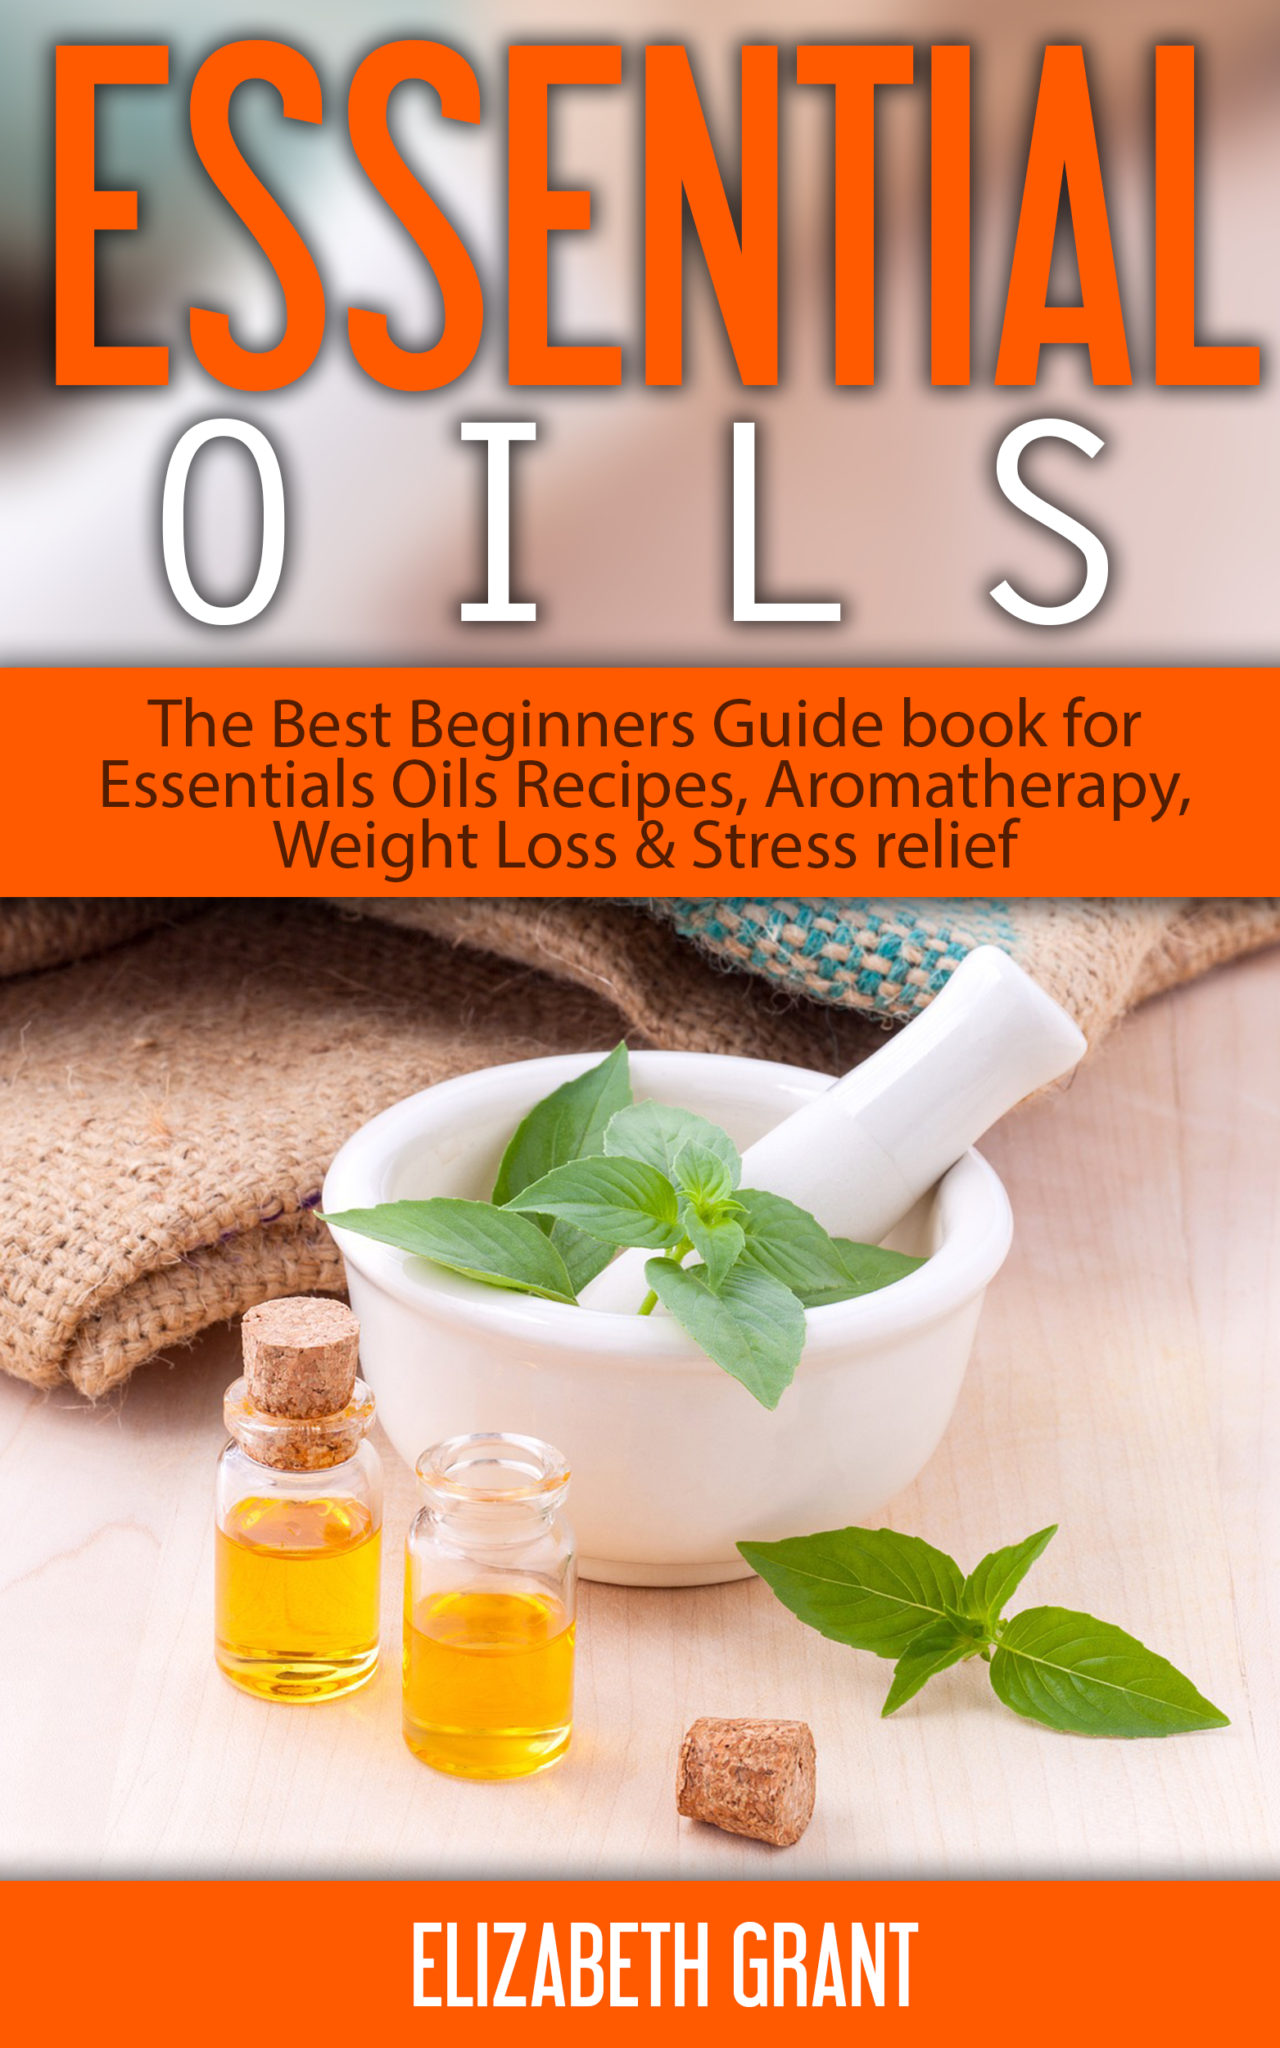 FREE: Essential Oils: The Best Beginners Guide Book for Essentials Oil Recipes, Aromatherapy, Weight Loss & Stress Relief by Elizabeth Grant